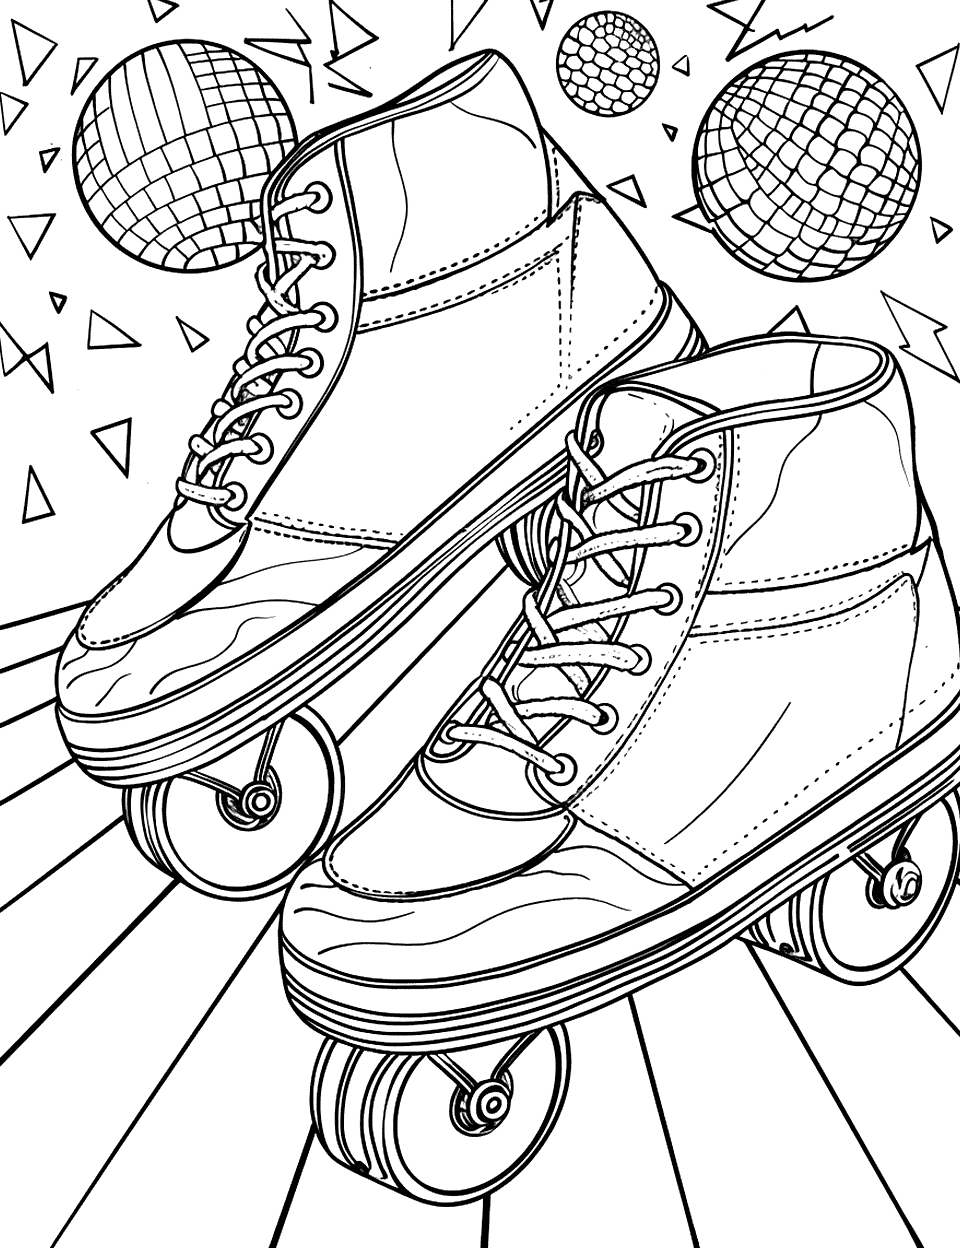 Vintage Roller Skates in a Rink Shoe Coloring Page - Classic roller skates with stripes on the rink floor, accompanied by disco balls overhead.